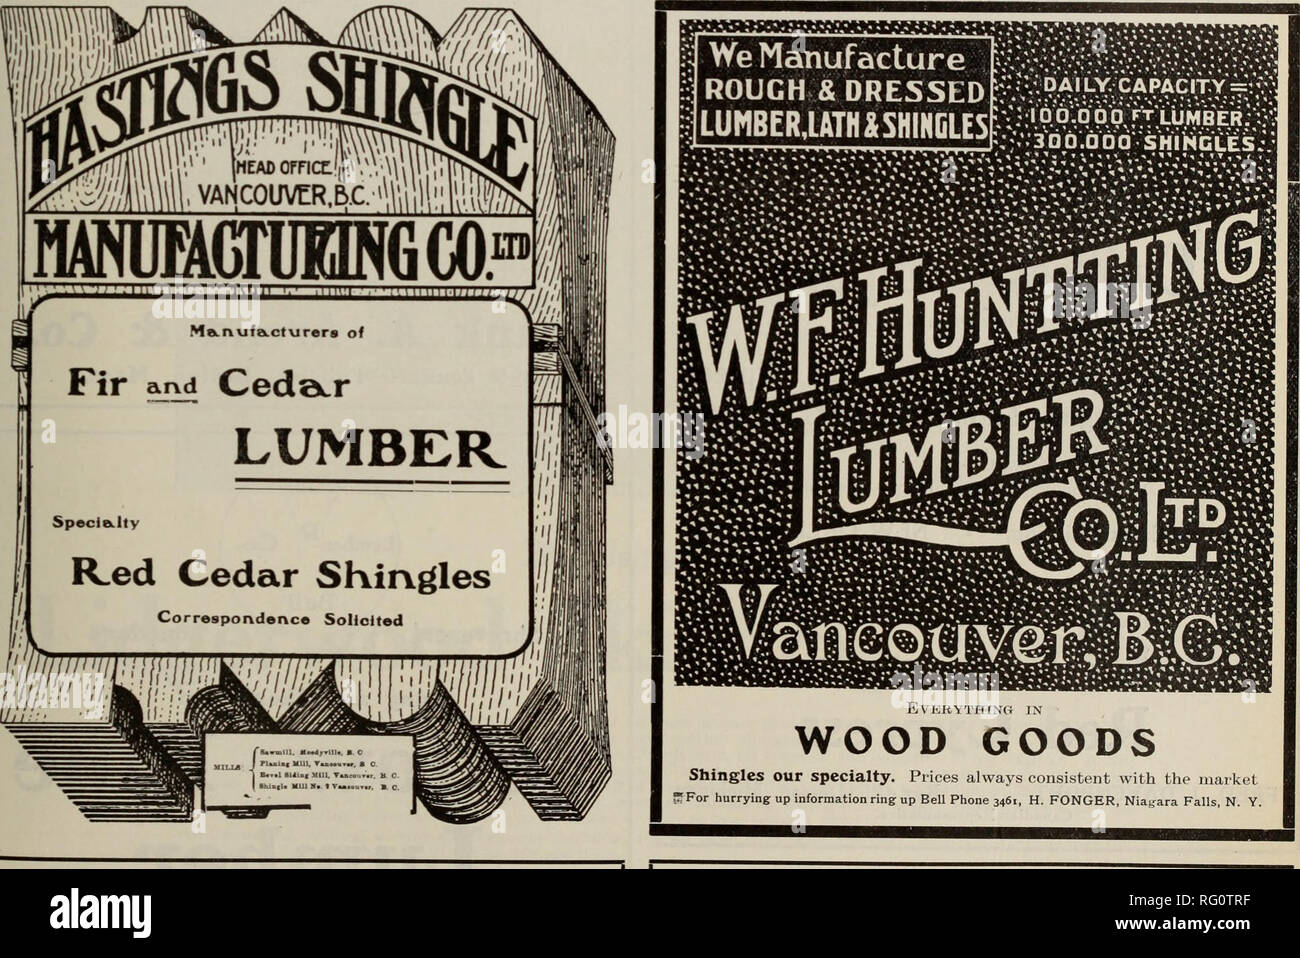 . Canadian forest industries 1909. Lumbering; Forests and forestry; Forest products; Wood-pulp industry; Wood-using industries. CANADA LUMBERMAN AND WOODWORKER 13 Cable Address—Gillisco. „ ( American Lumberman Telecode. Codes Used i ,,.   estern Union. C. H. GILLIS &amp; CO LIMITED 445 Granville St., Vancouver, B. C. Wholesale Lumber and Shingles Railway Construction Material a Specialty Guaranteed Daily Shipping- Capacity 800,000 SHINGLES a.d 125,000 feet LUMBER. The Pacific Woods Co. Limited Head Office : 205-206 Loo Bldg., T n ft Cor. Hastings and Abbot Sts., VcHlCOUVer, D.L. Correspond Stock Photo